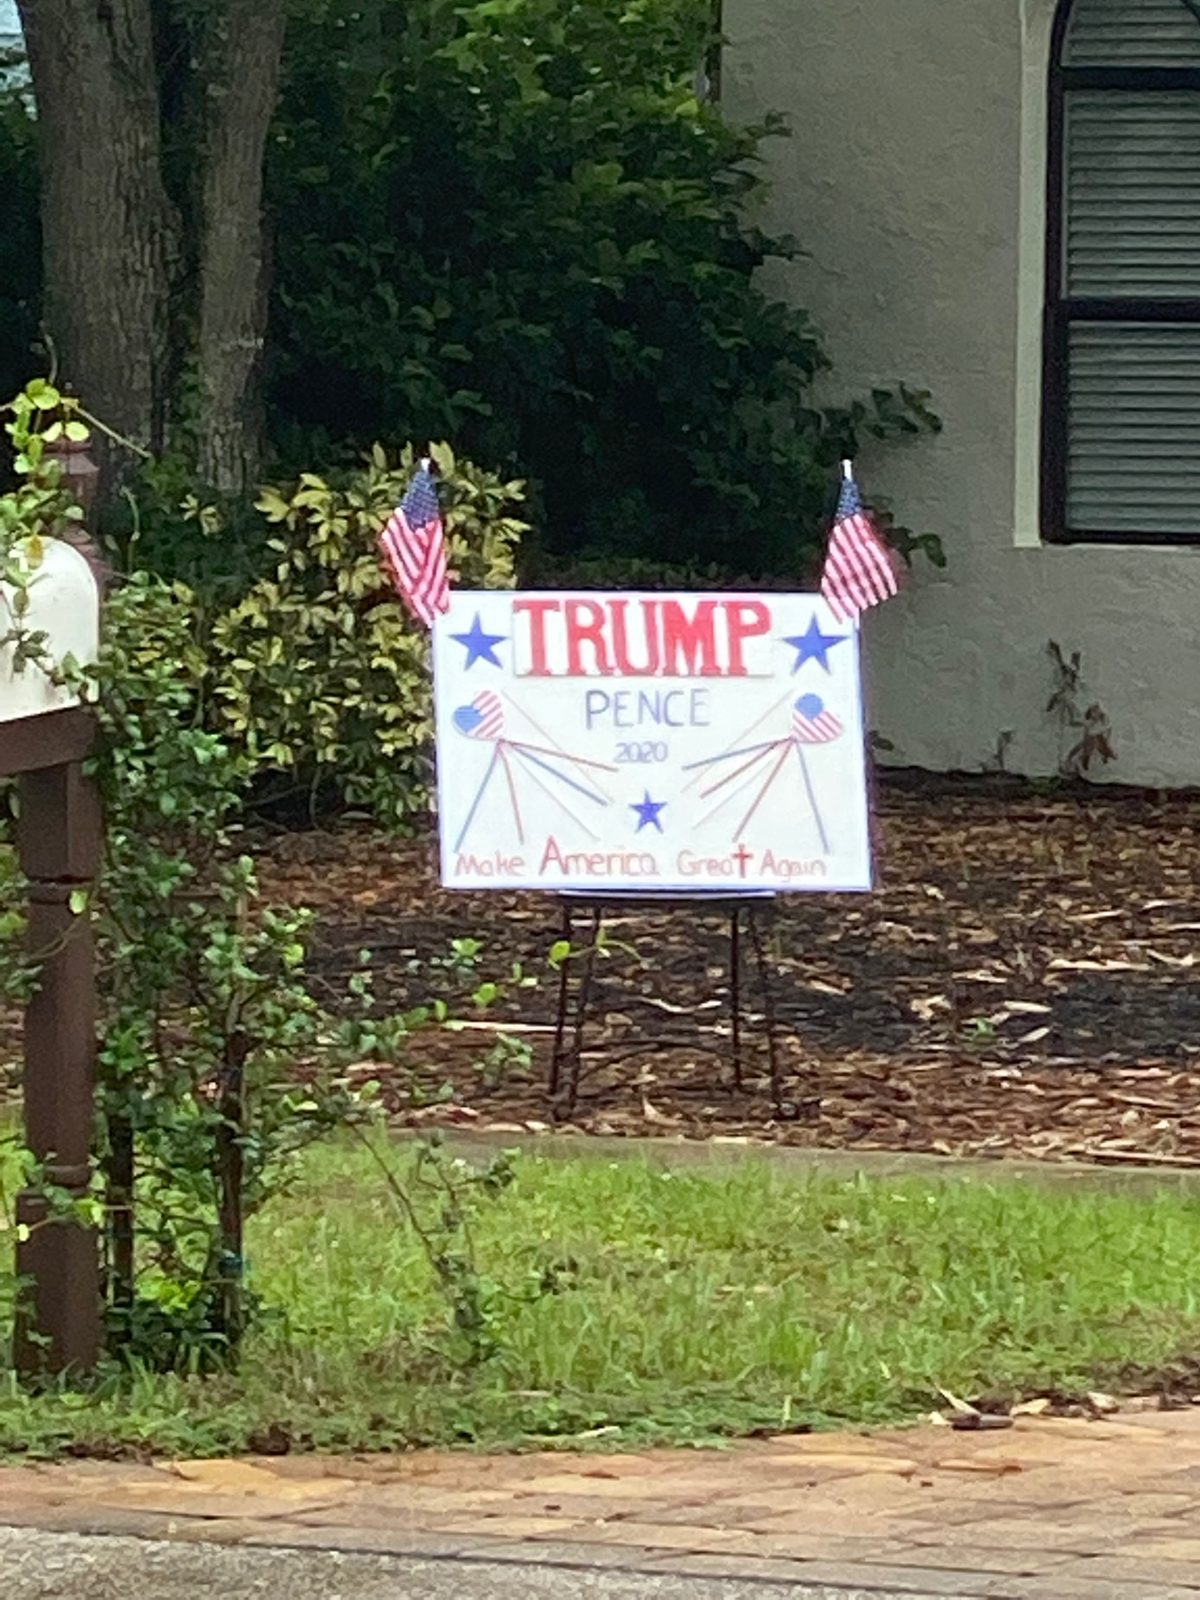 Being a good neighbor in TrumpWorld